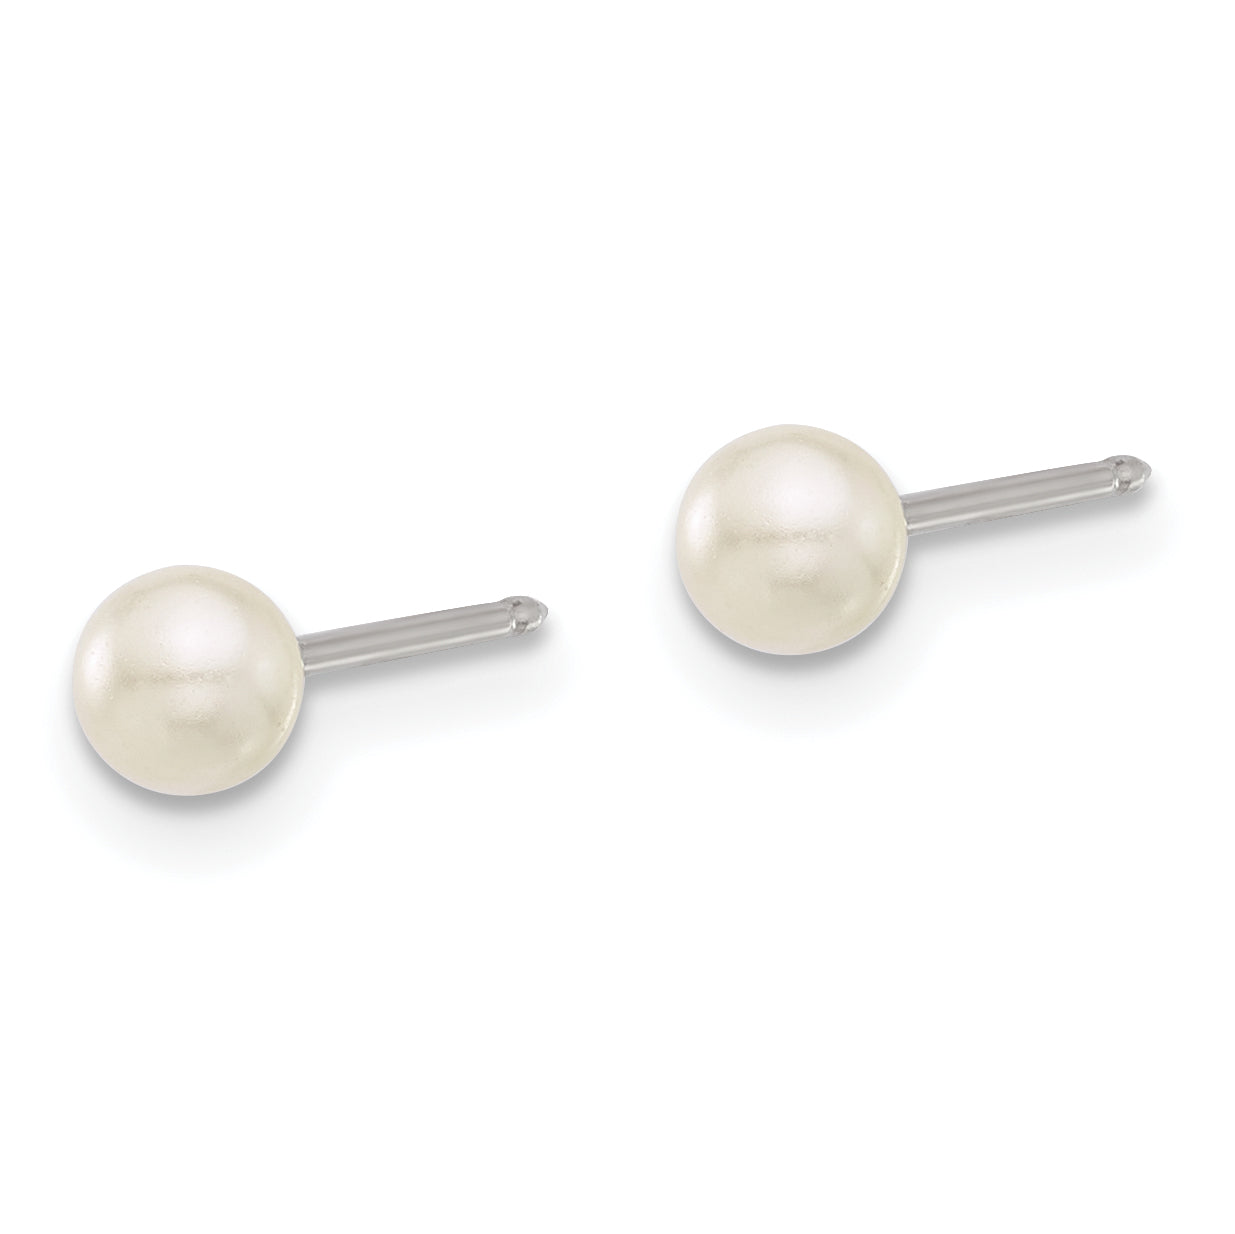 Inverness Stainless Steel 4mm Glass Pearl Post Earrings